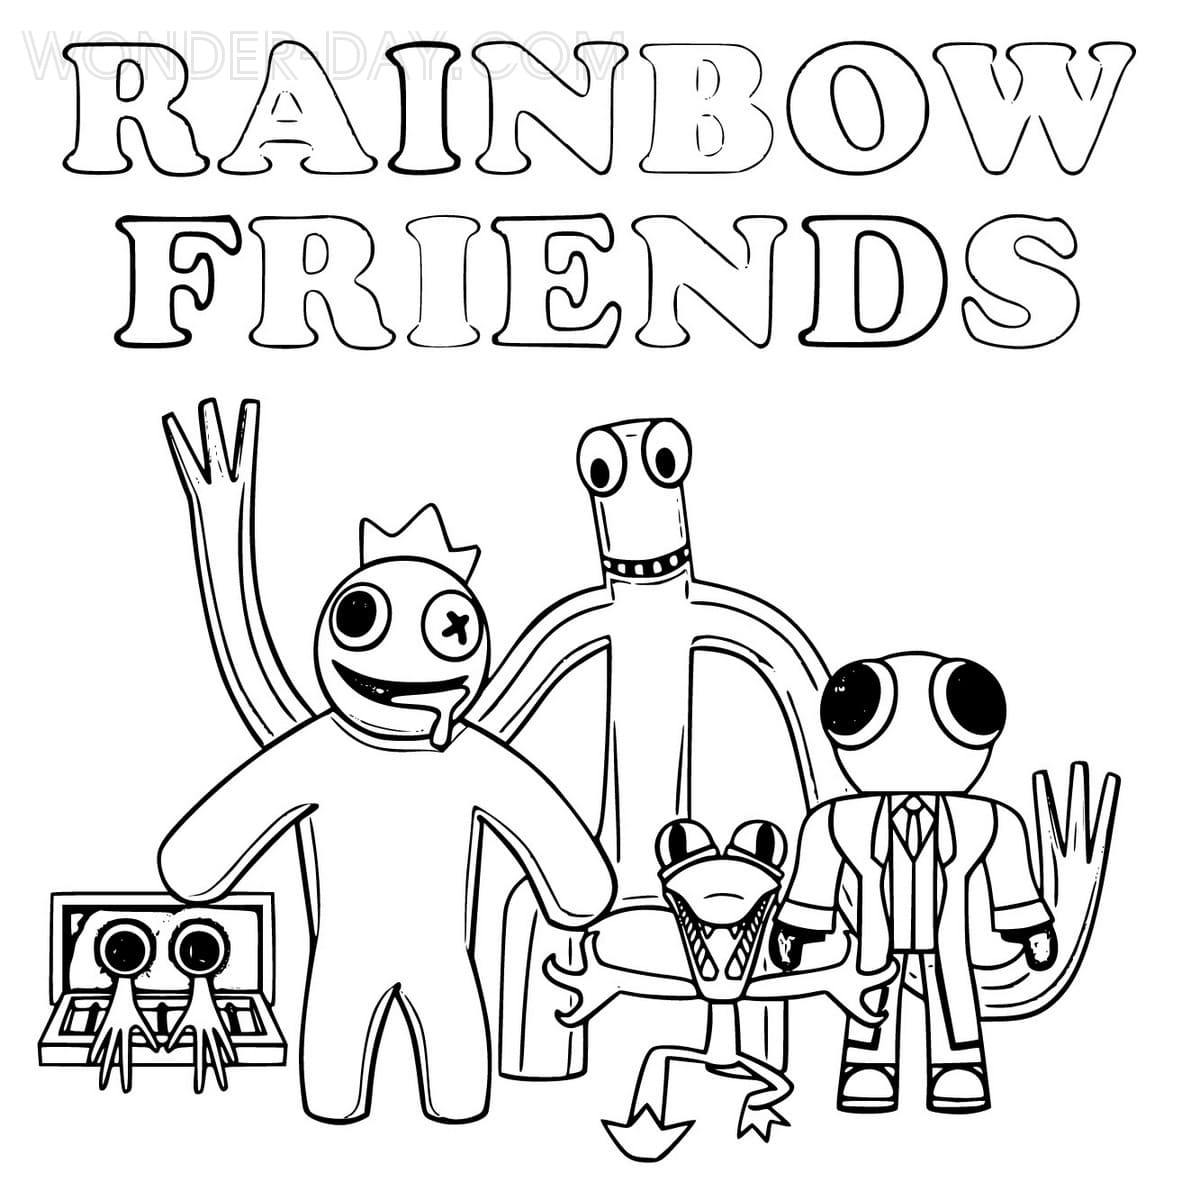 Printable Yellow from Rainbow Friends Coloring Page for kids.